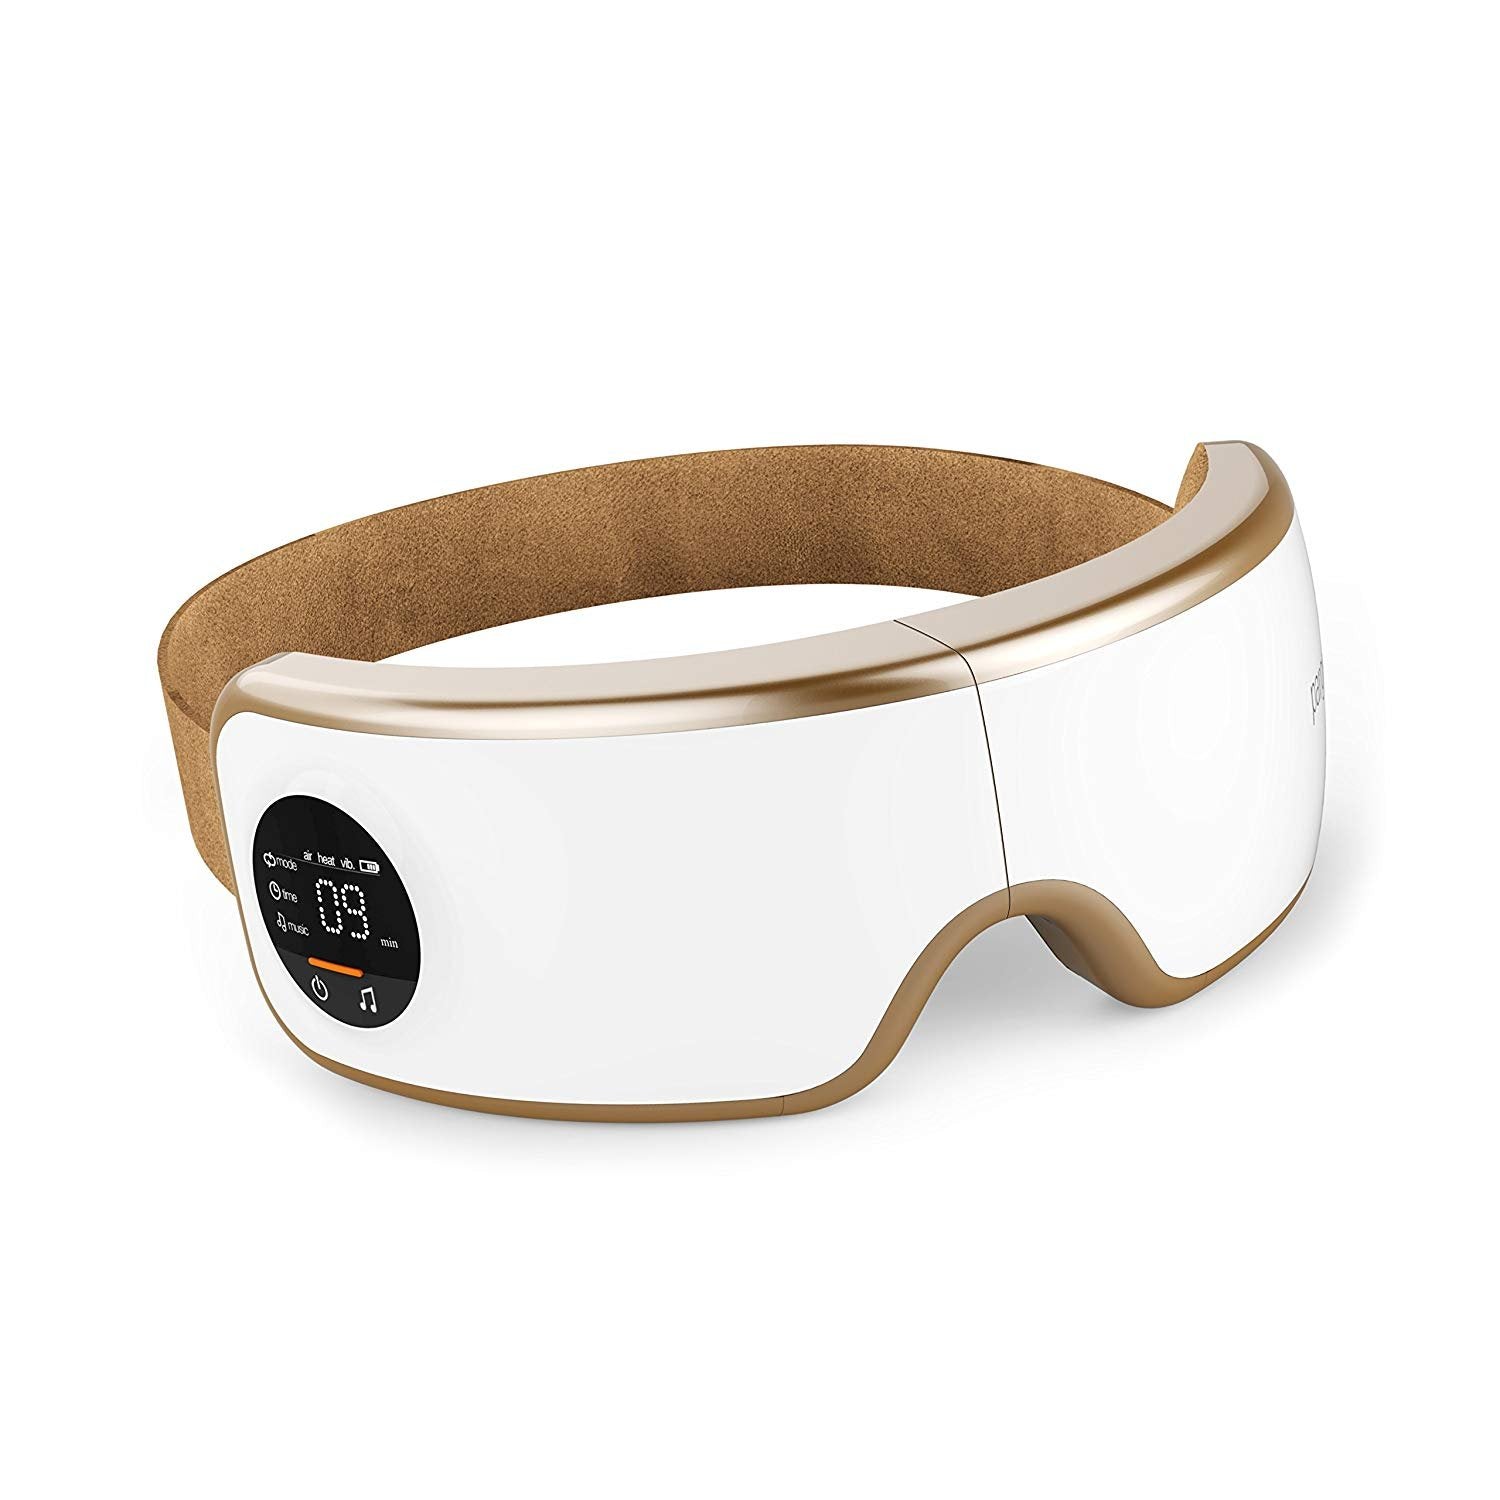 Eye Massager with Heat and Compression - Smart Eye Massager for Migraines and Stress Therapy - Wireless Heated Mask w/ Music, Built-in Battery & Adjustable Elastic Band - Vibration Massage Eye Relief White/Gold